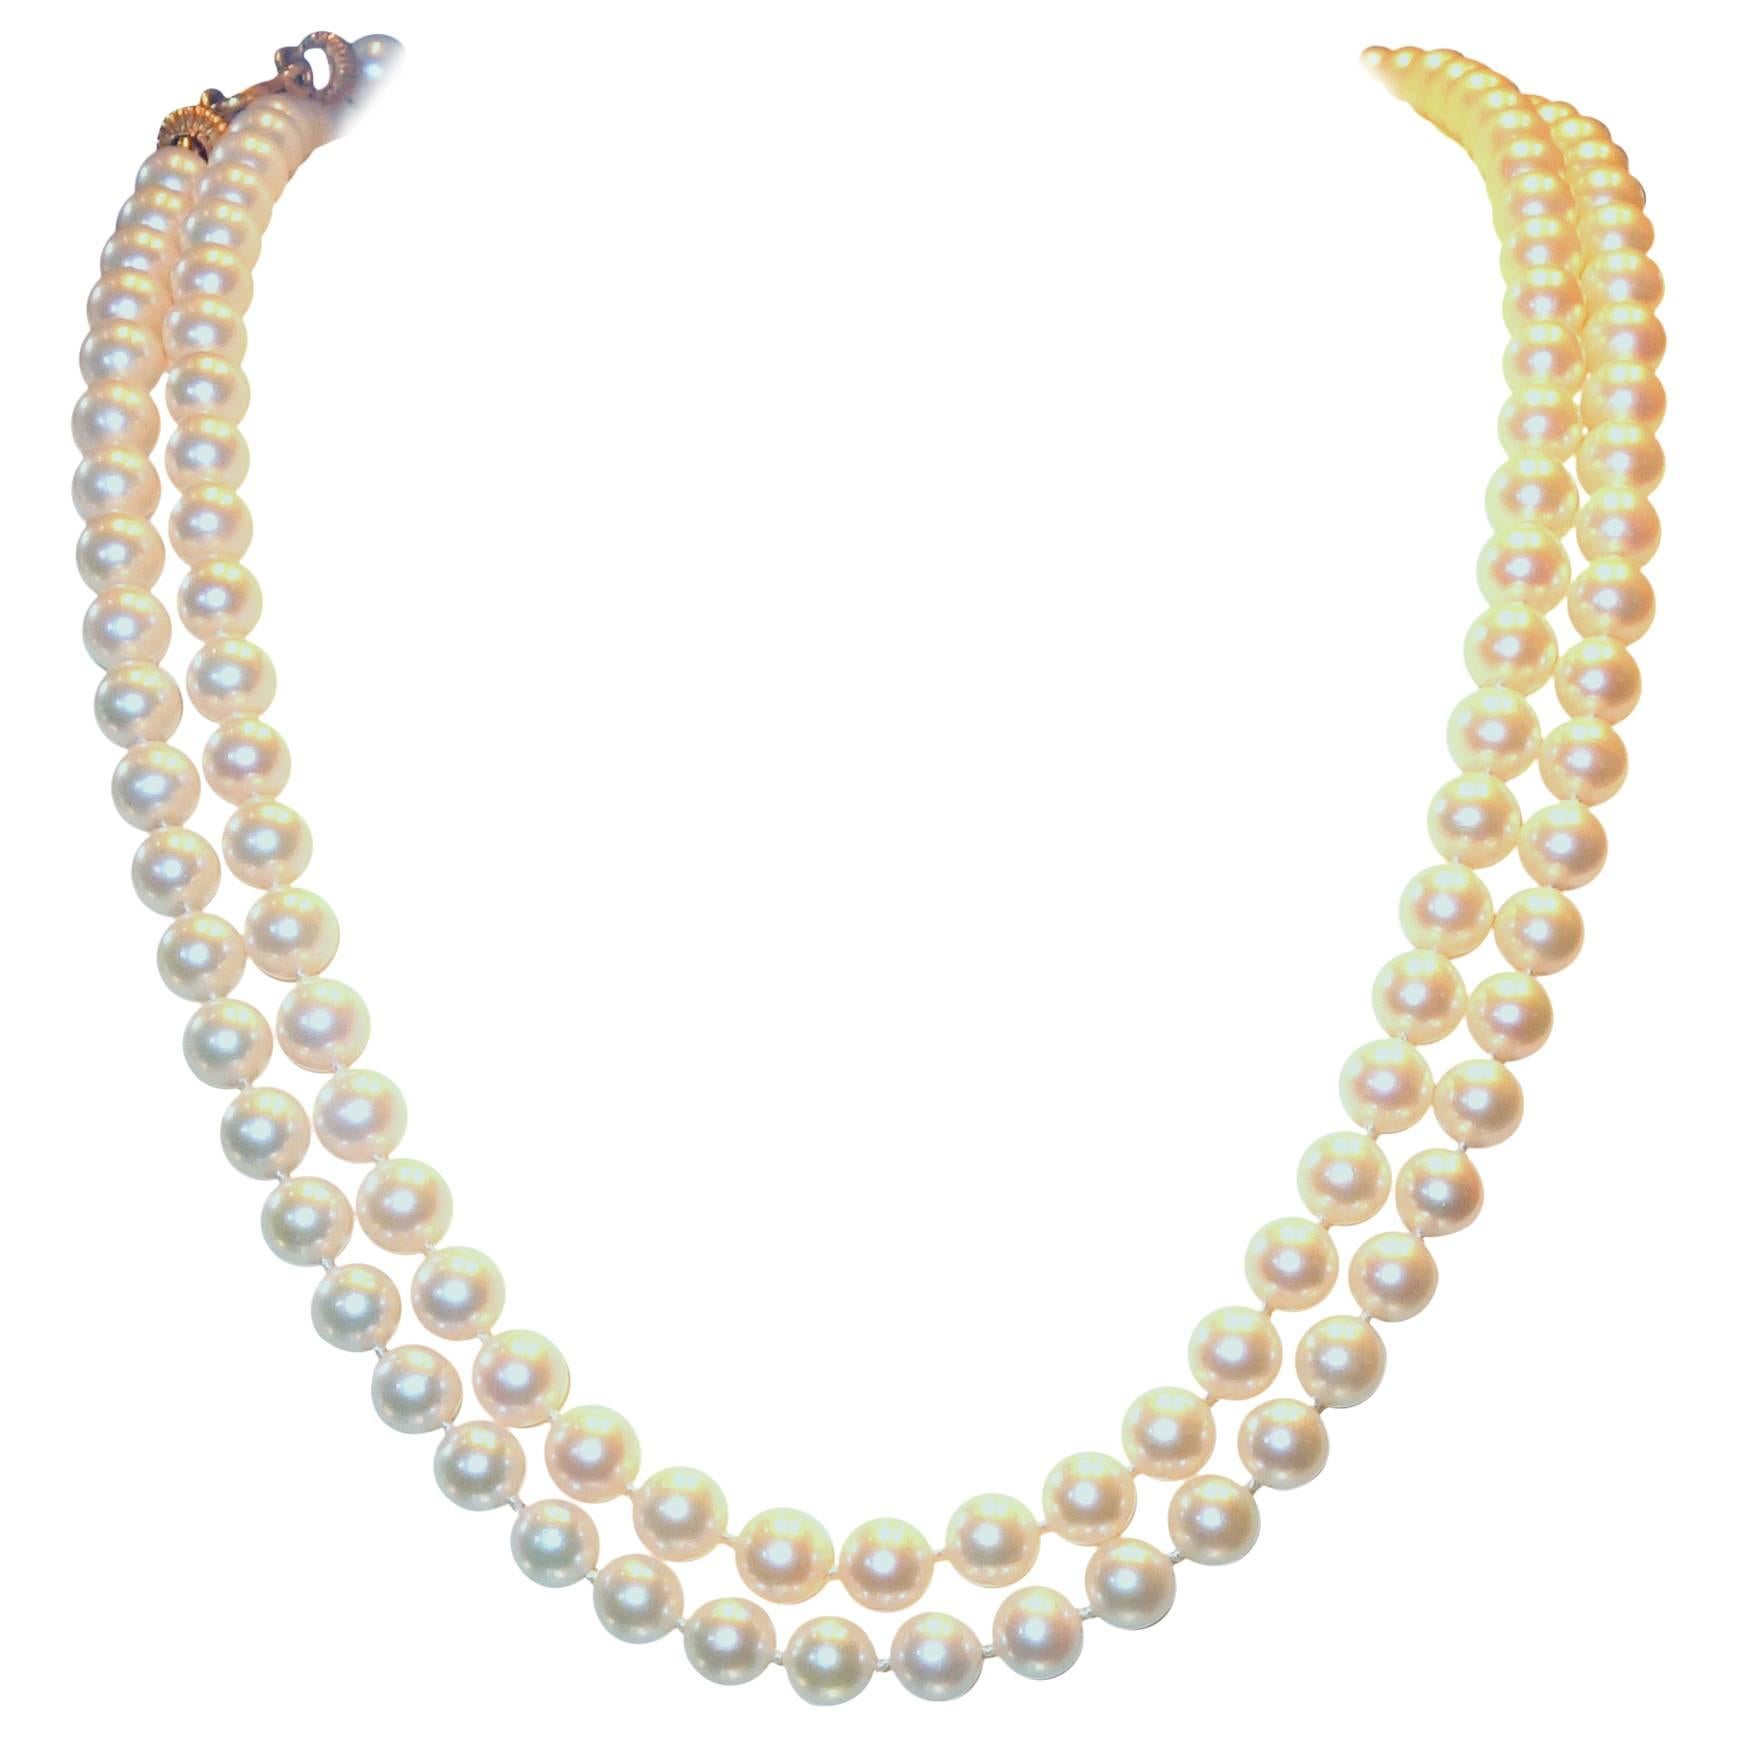 Fine double strand of pearls.